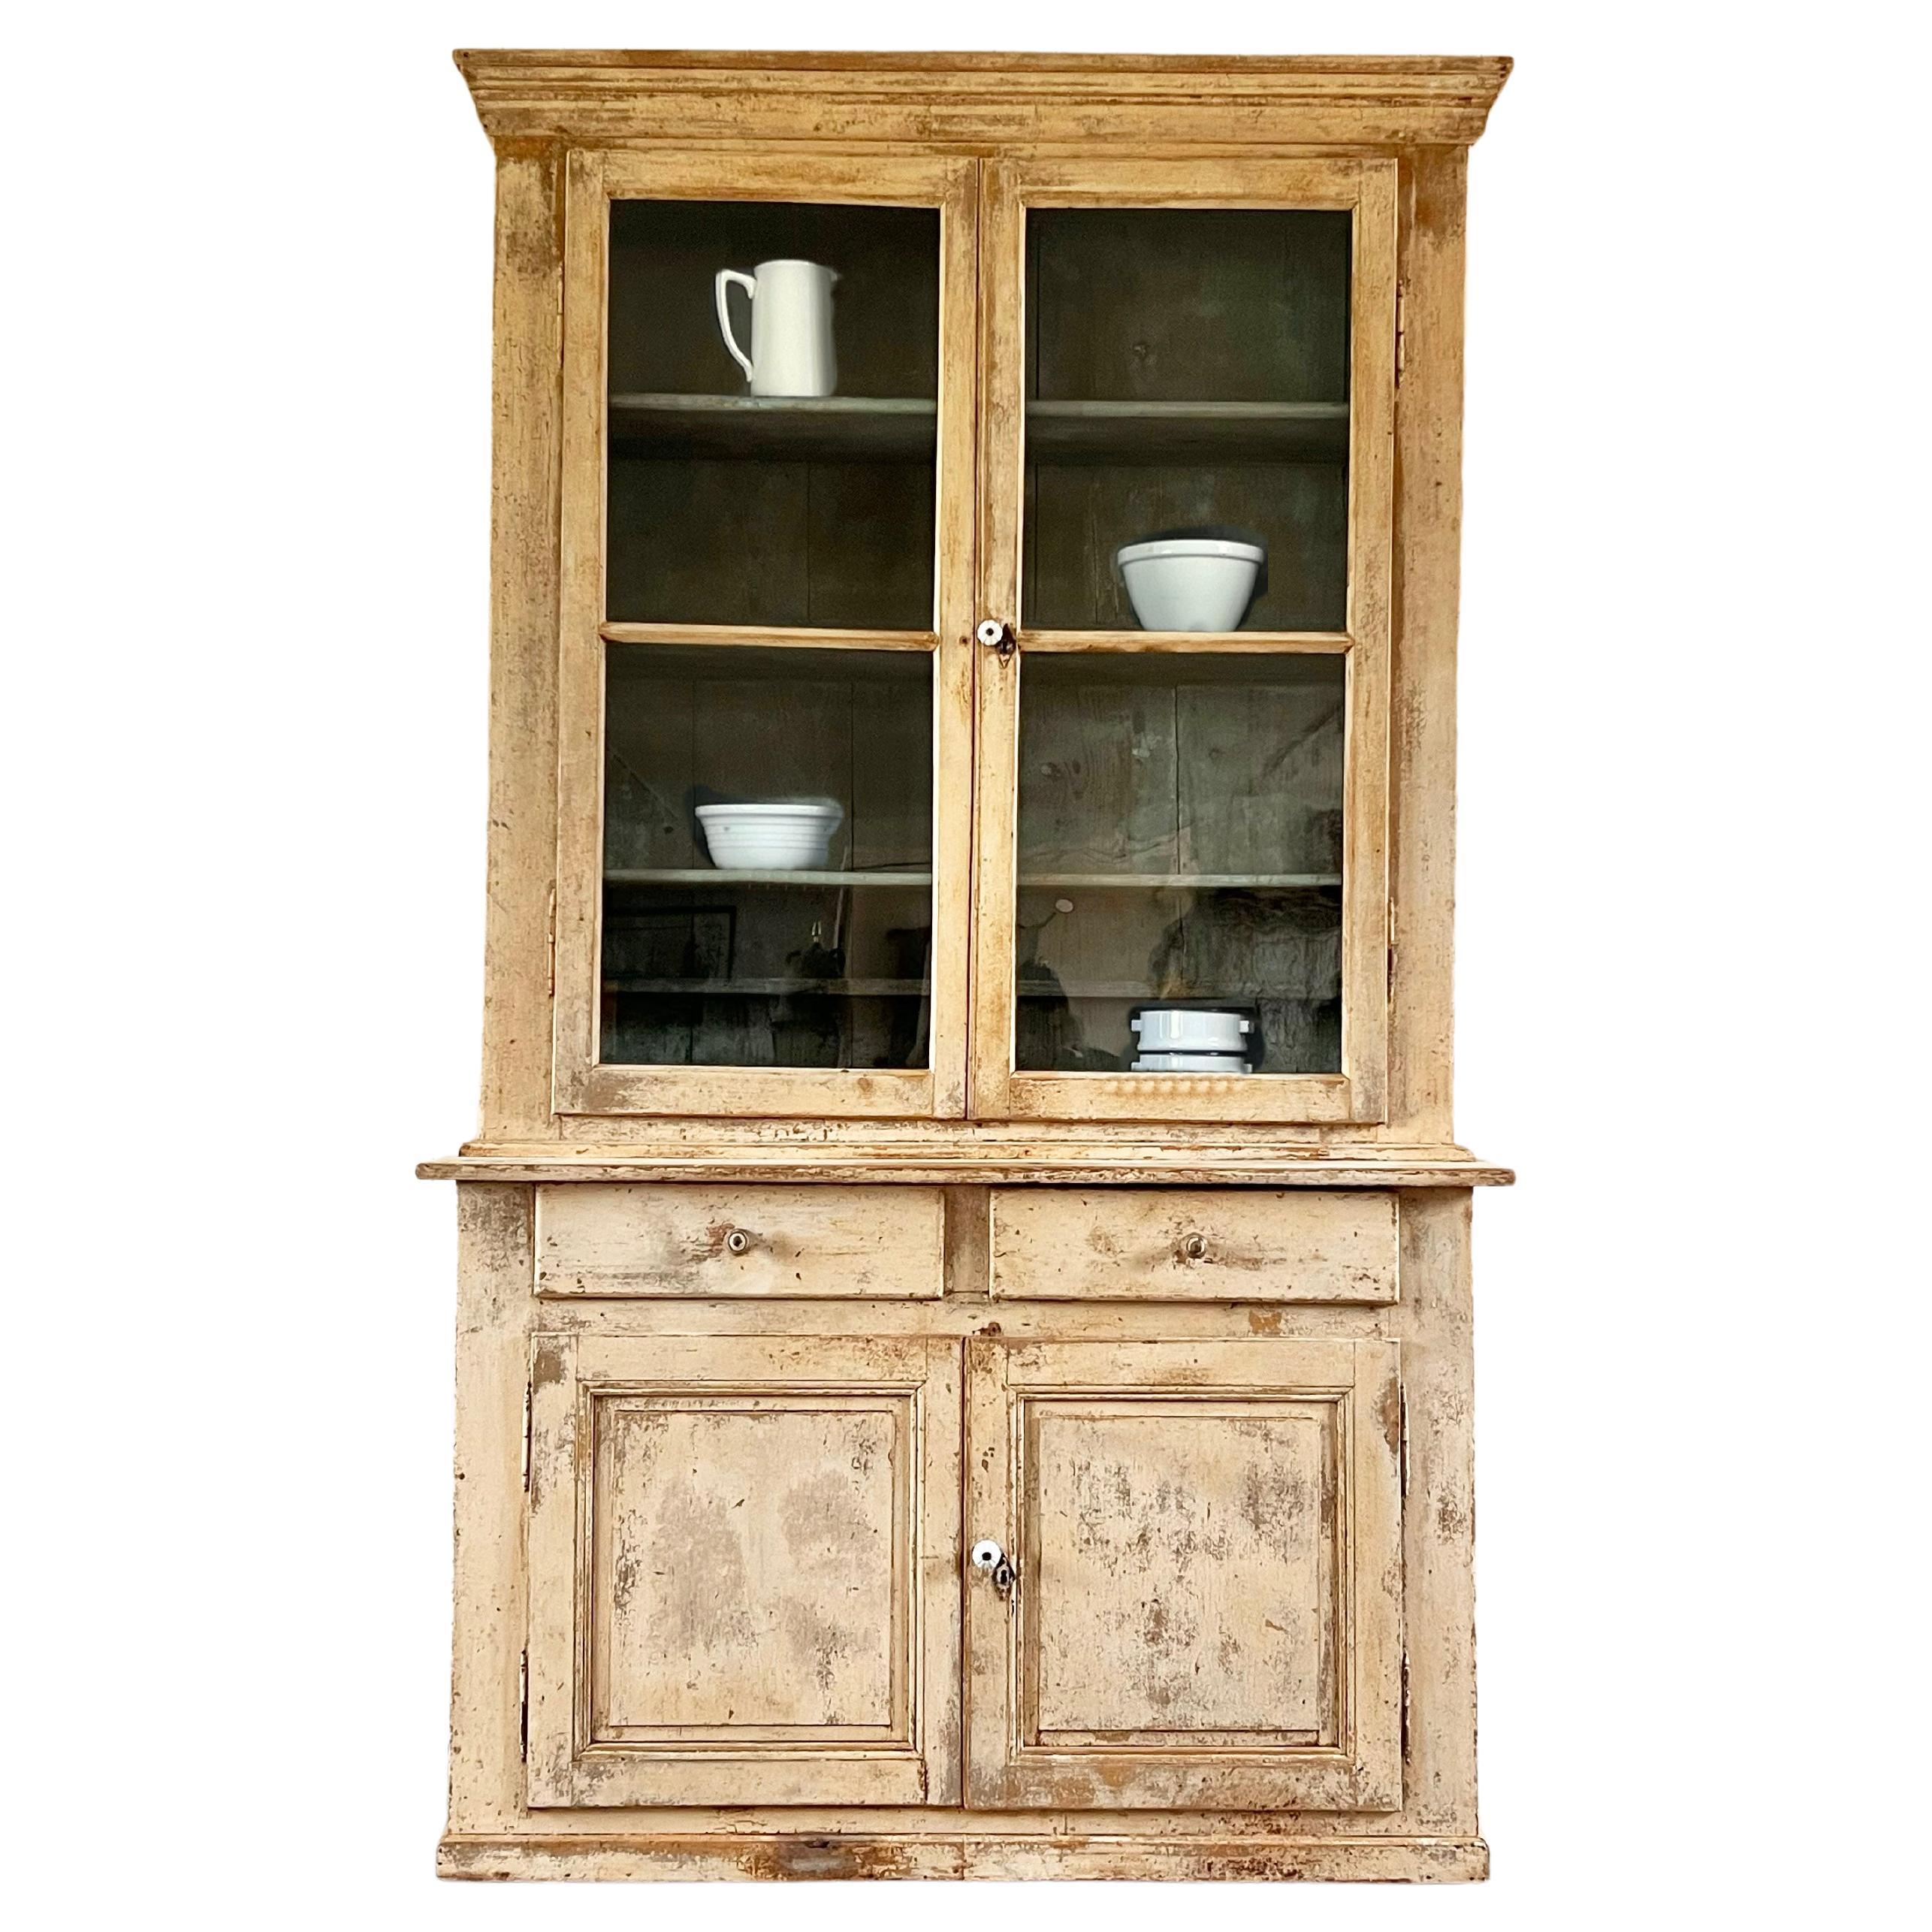 19th Century Glazed French Painted Cupboard